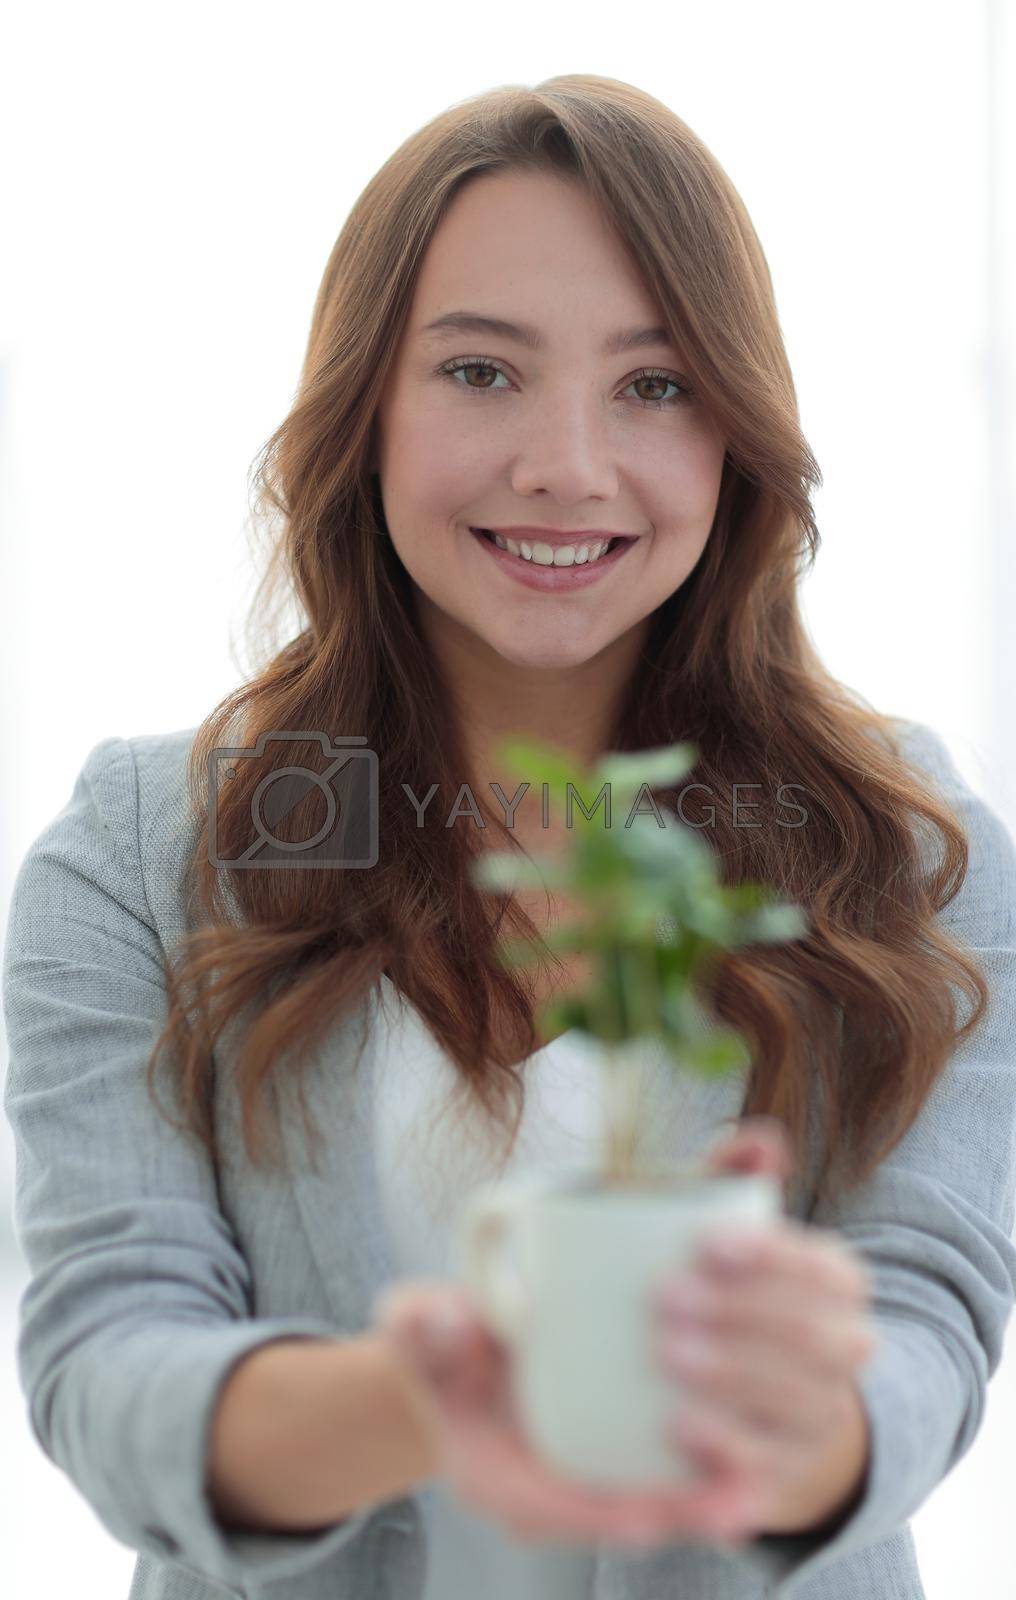 Royalty free image of close up.a woman's business shows you a sapling by asdf